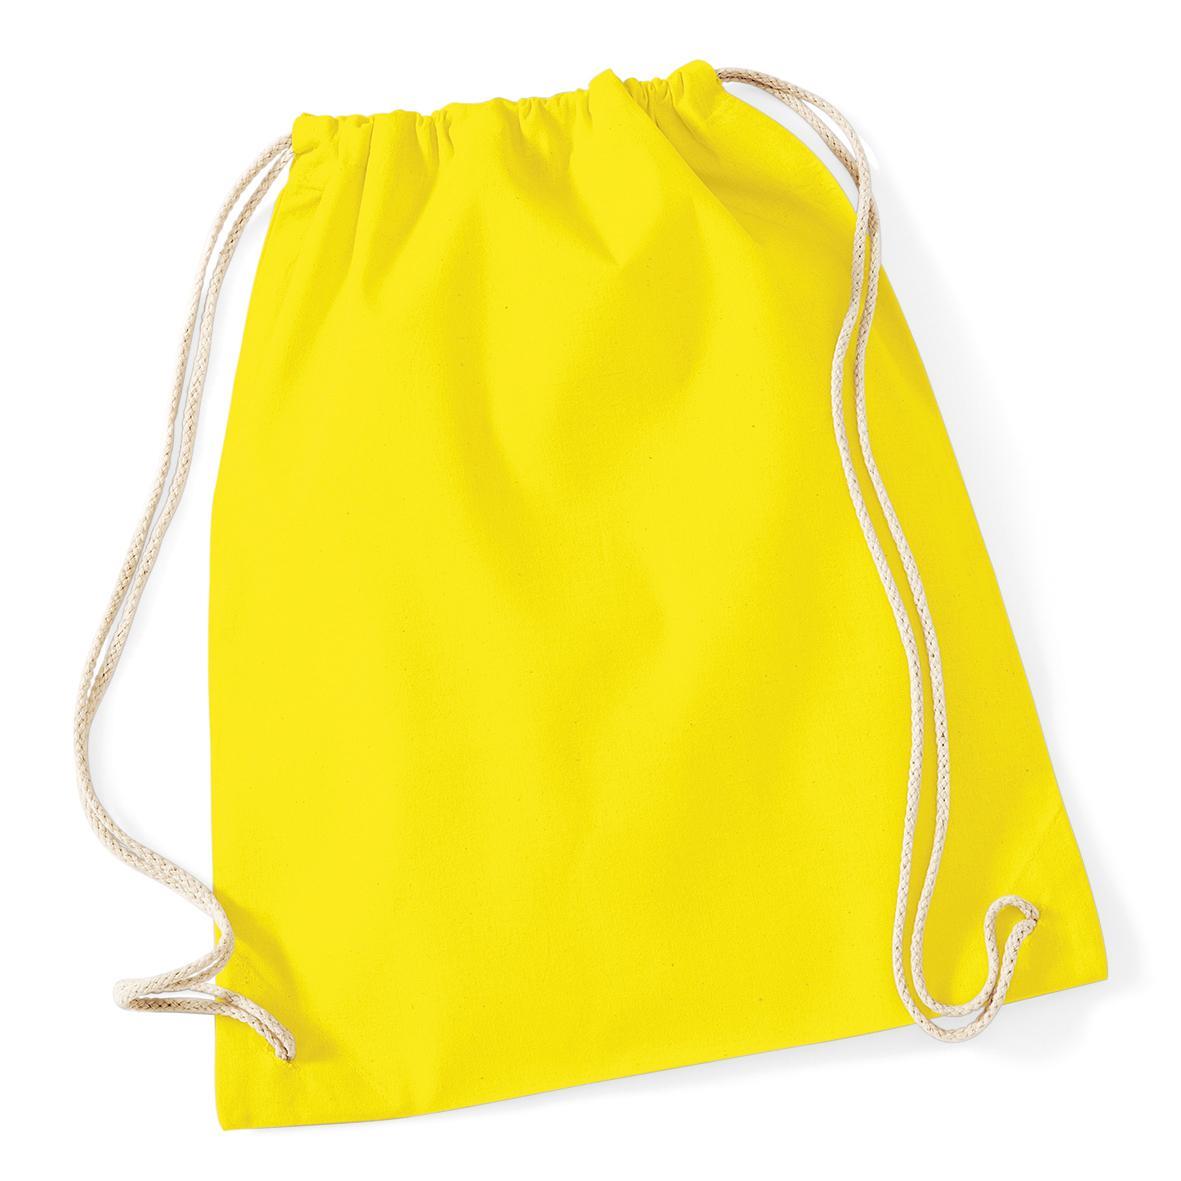 Westford Mill Cotton Gymsac Bag - 12 Litres (Pack of 2) (Yellow) (One Size)